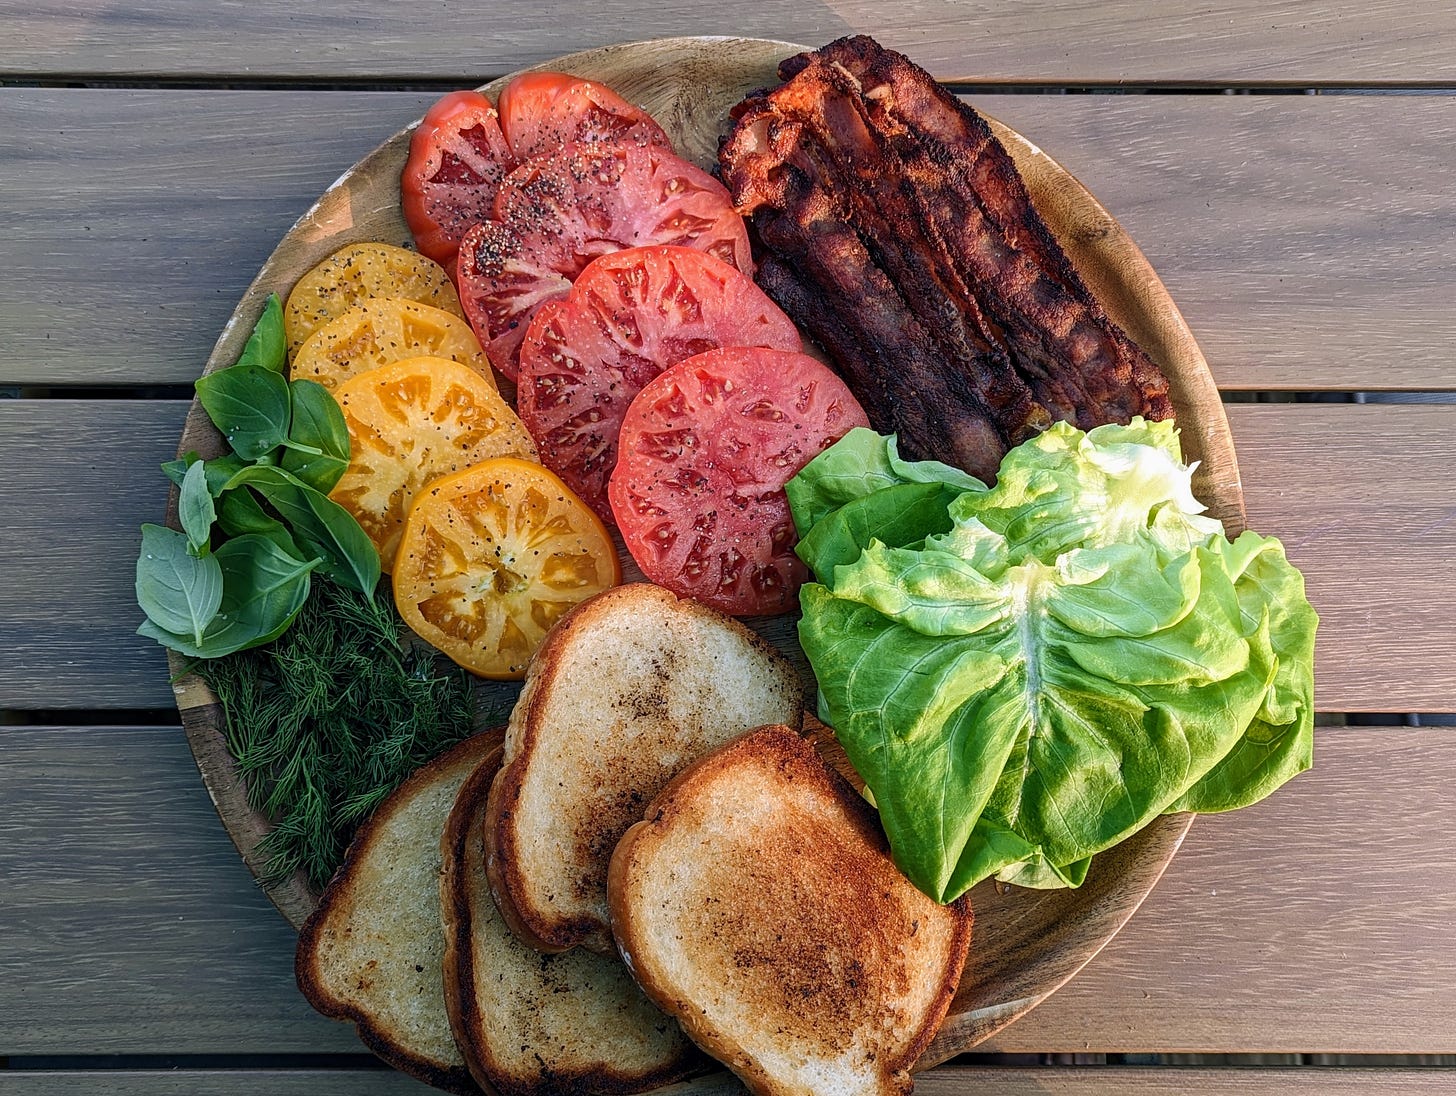 A vibrant and colorful blt board with bacon, lettuce, tomatoes, bread, and herbs.